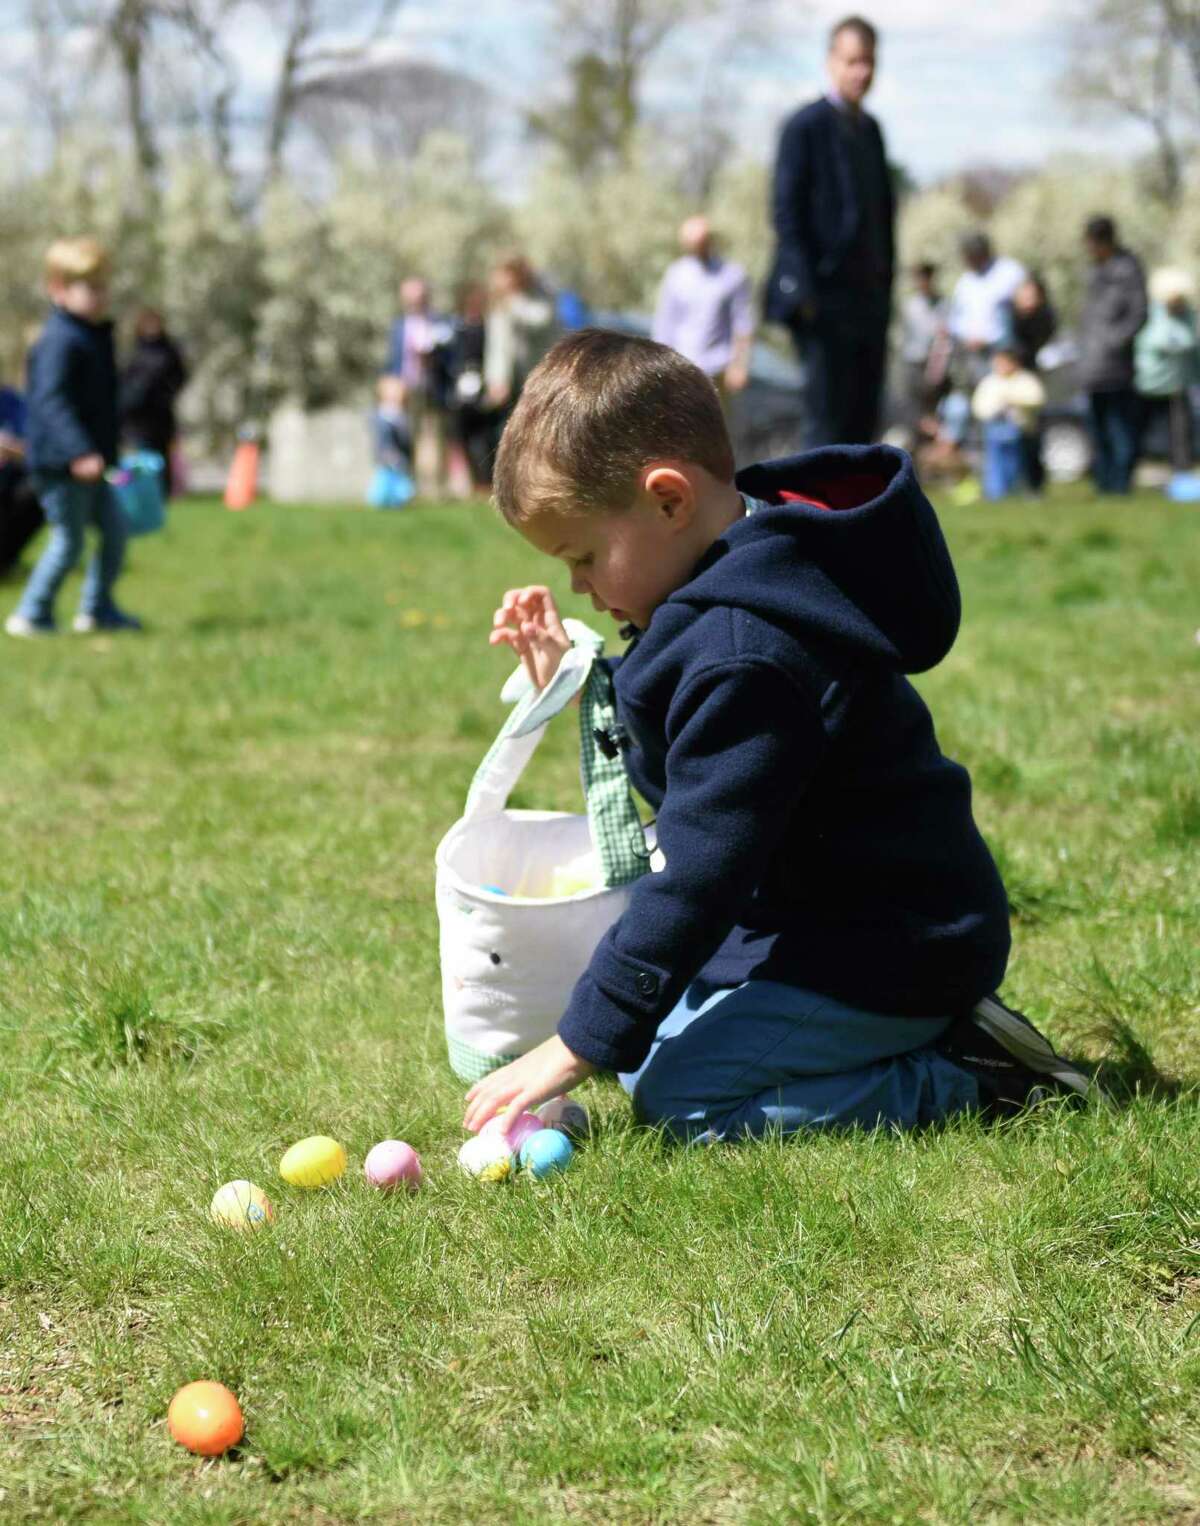 Greenwich's Boyd Butcher, 4, hunts for Easter eggs at Second Congregational Church in Greenwich, Conn. Sunday, April 17, 2022. Following Easter services, children set out to hunt for candy-filled Easter eggs on the church lawn. There were also live bunnies and goats on hand for kids to pet.